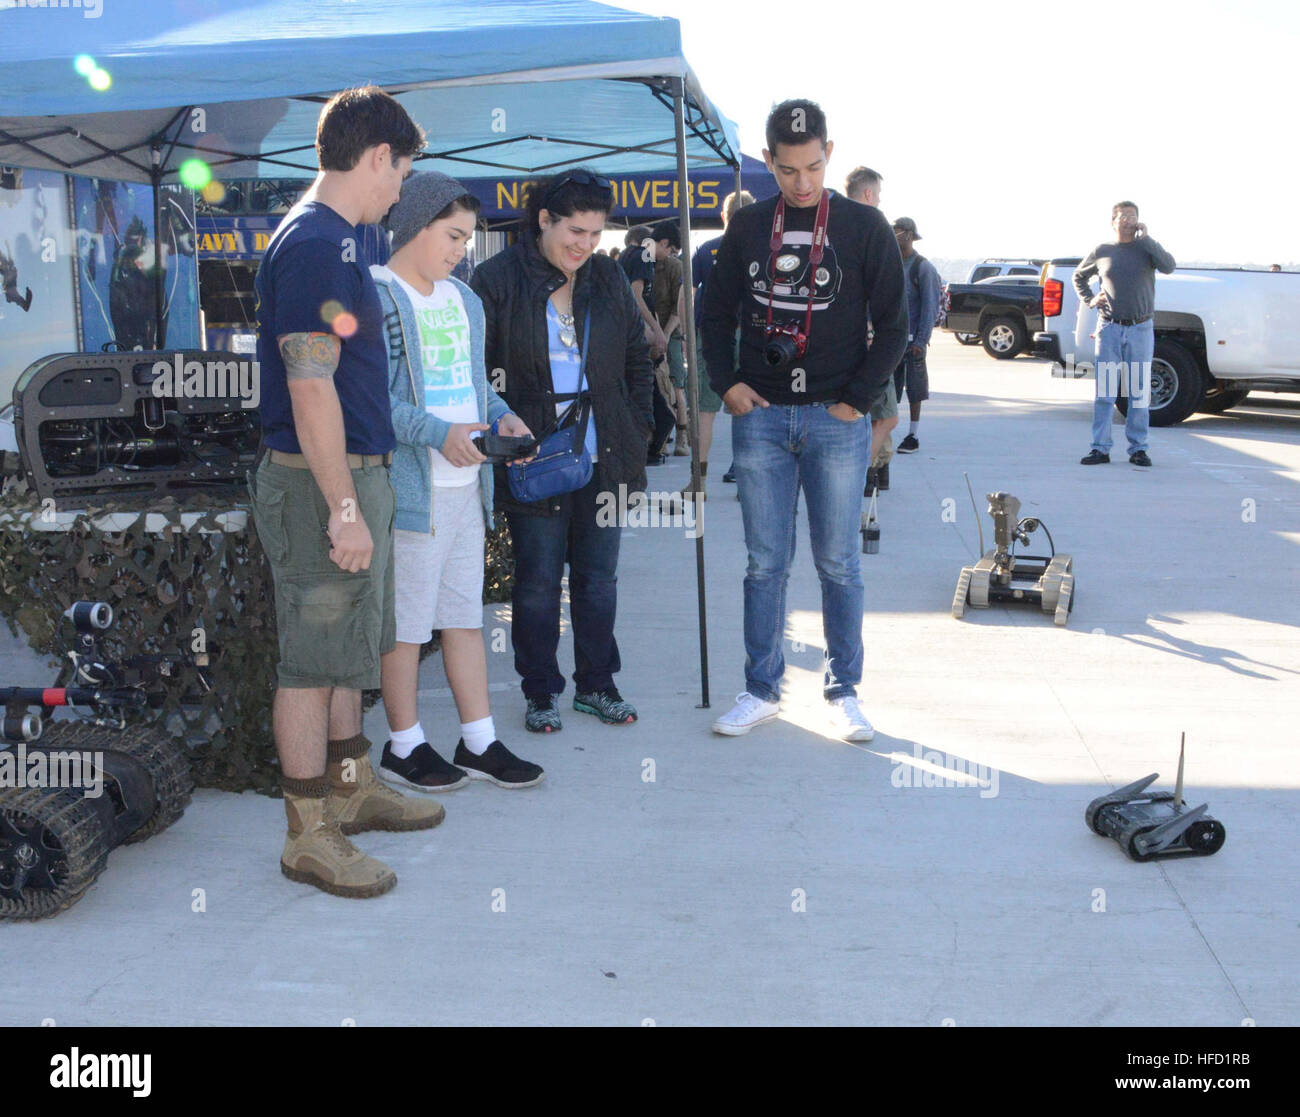 151111-N-NH654-010 SAN DIEGO (Nov. 11, 2015) Explosive Ordnance Disposal 2rd Class Louis Velarde explains to a visitor how to operate a robot during the Salute to Service Festival.  Explosive Ordnance Disposal Mobile Unit 11 is participating in the Salute to Service Festival, which is held annual on the USS Midway on Veterans Day. (U.S. Navy photo by Lieutenant Patricia Kreuzberger/Released) Salute to Service 151111-N-NH654-010 Stock Photo